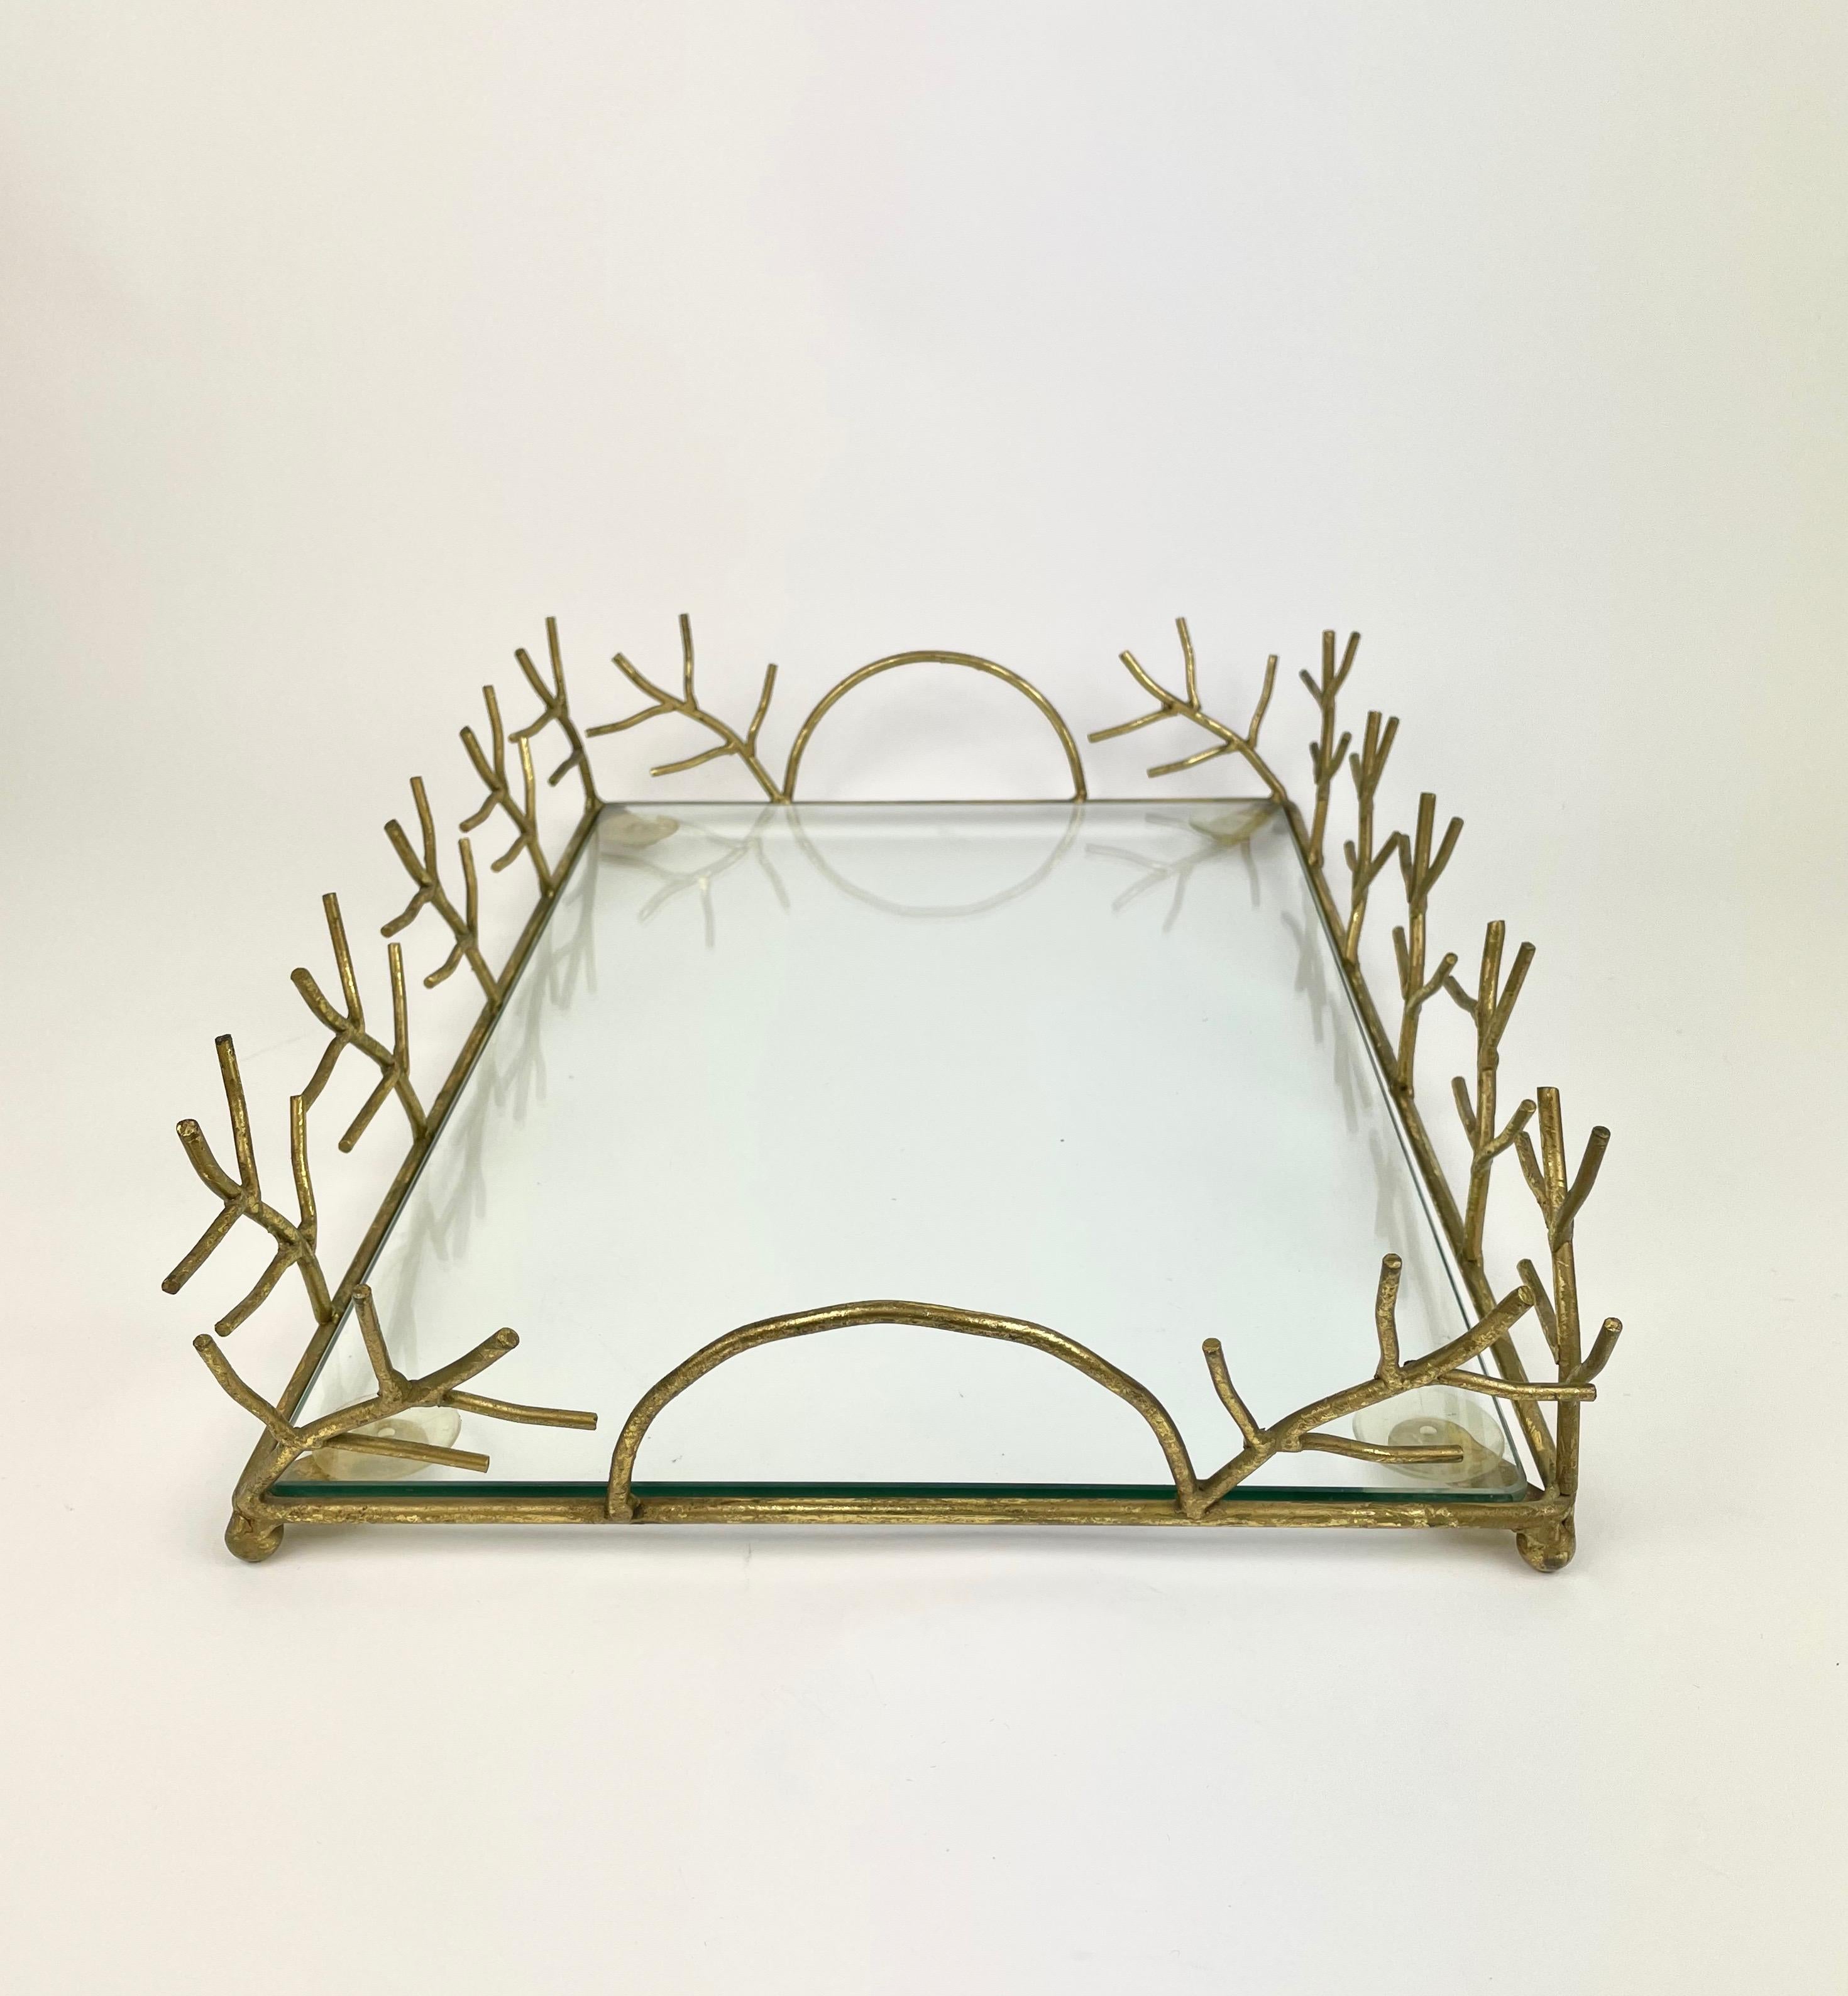 Italian Serving Tray in Glass and Golden Metal Branches Maison Baguès Style France 1970s For Sale